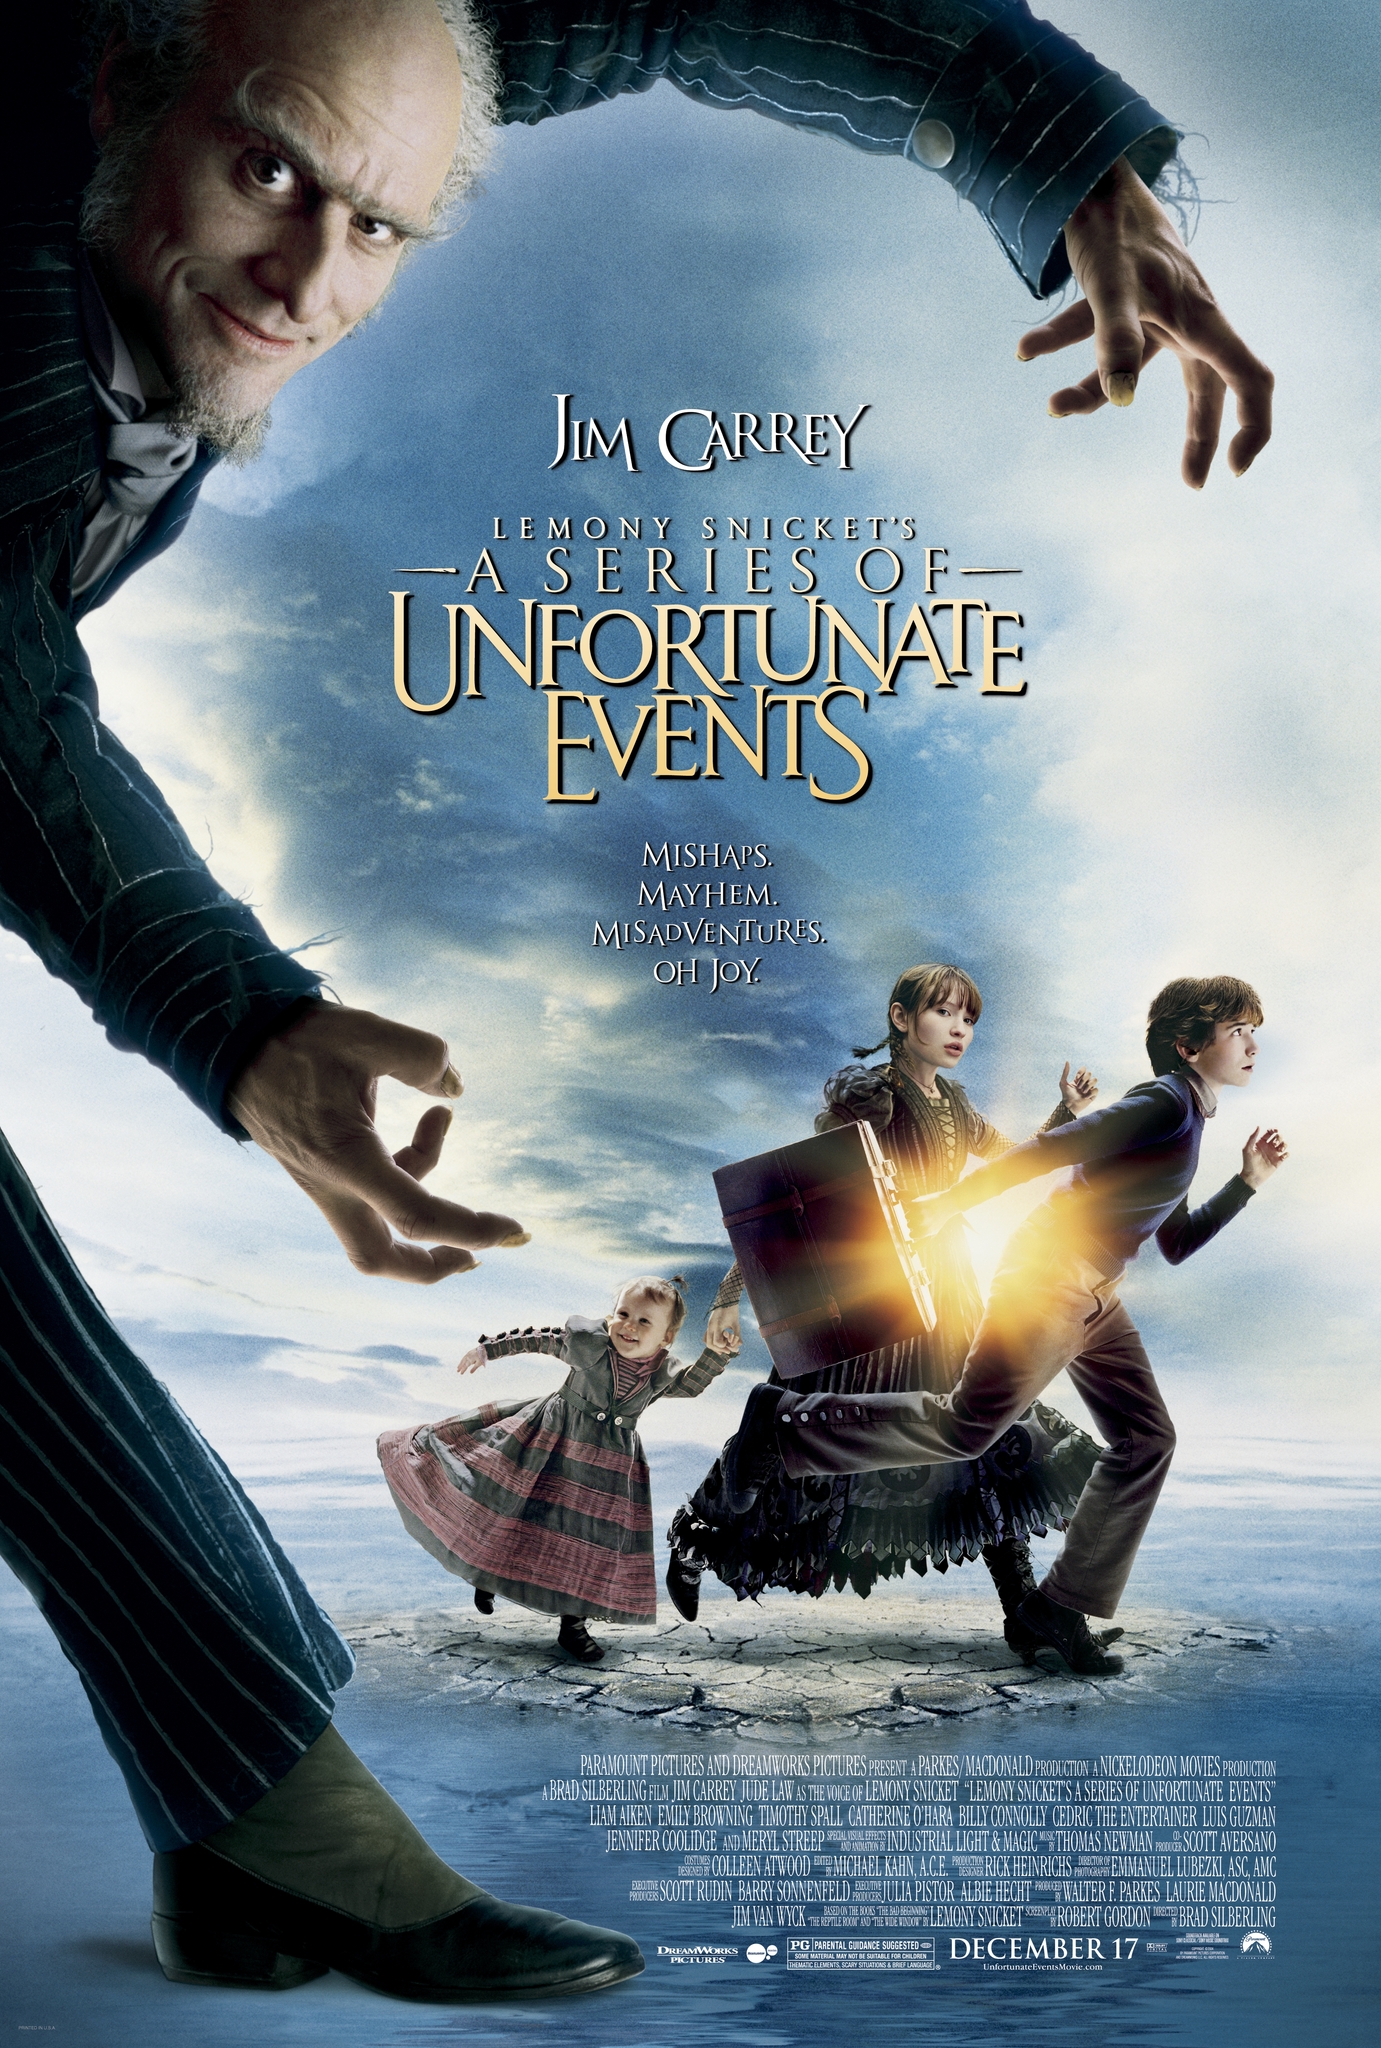 Lemony Snicket's A Series of Unfortunate Events [2004]